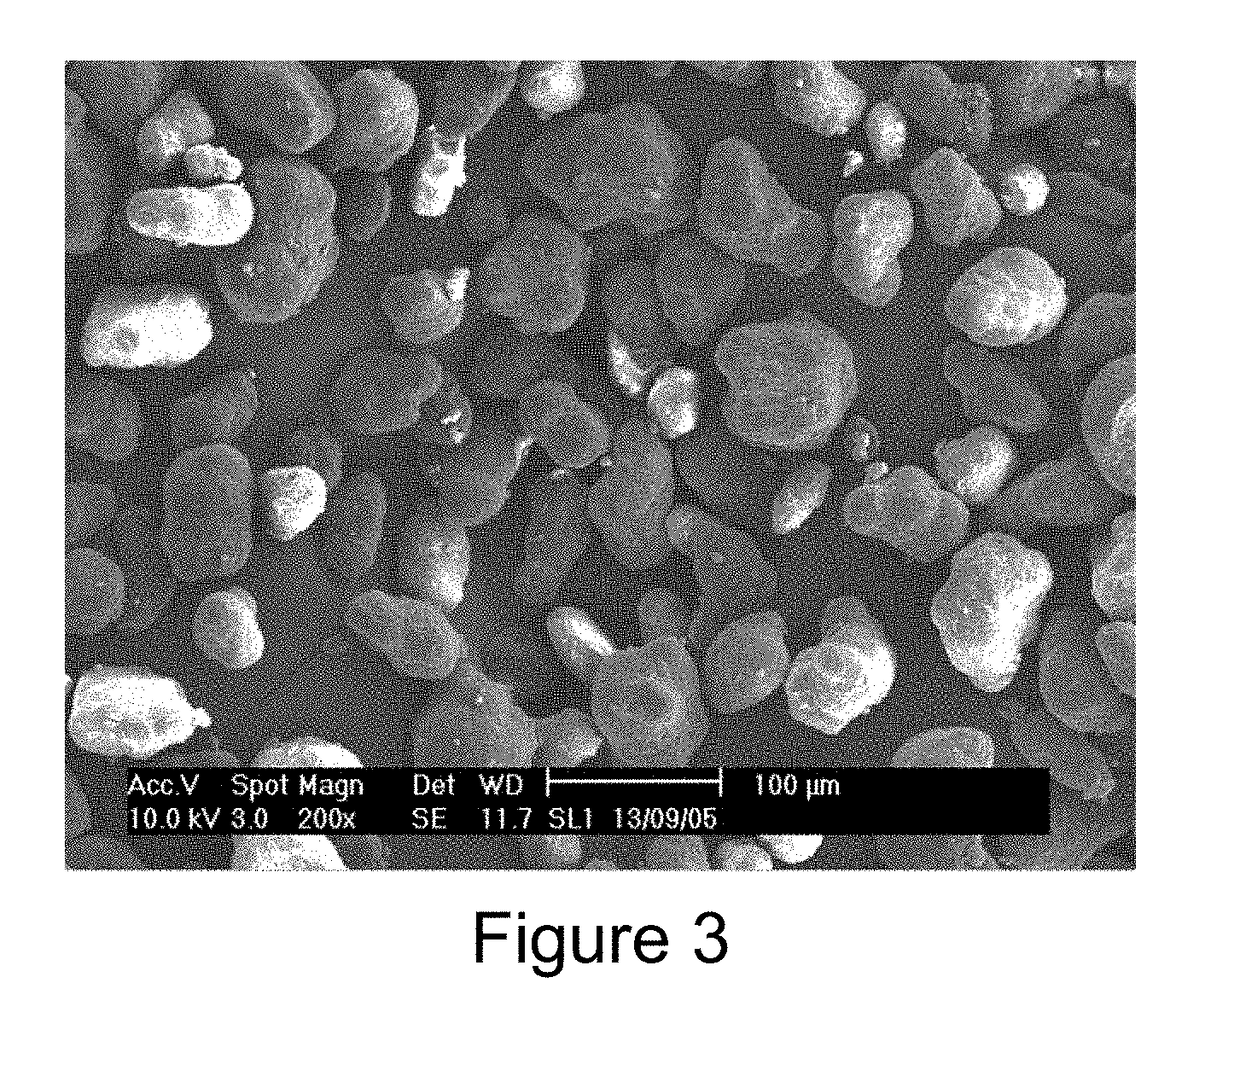 Polyolefin resin powder suitable for selective laser sintering and its preparation method